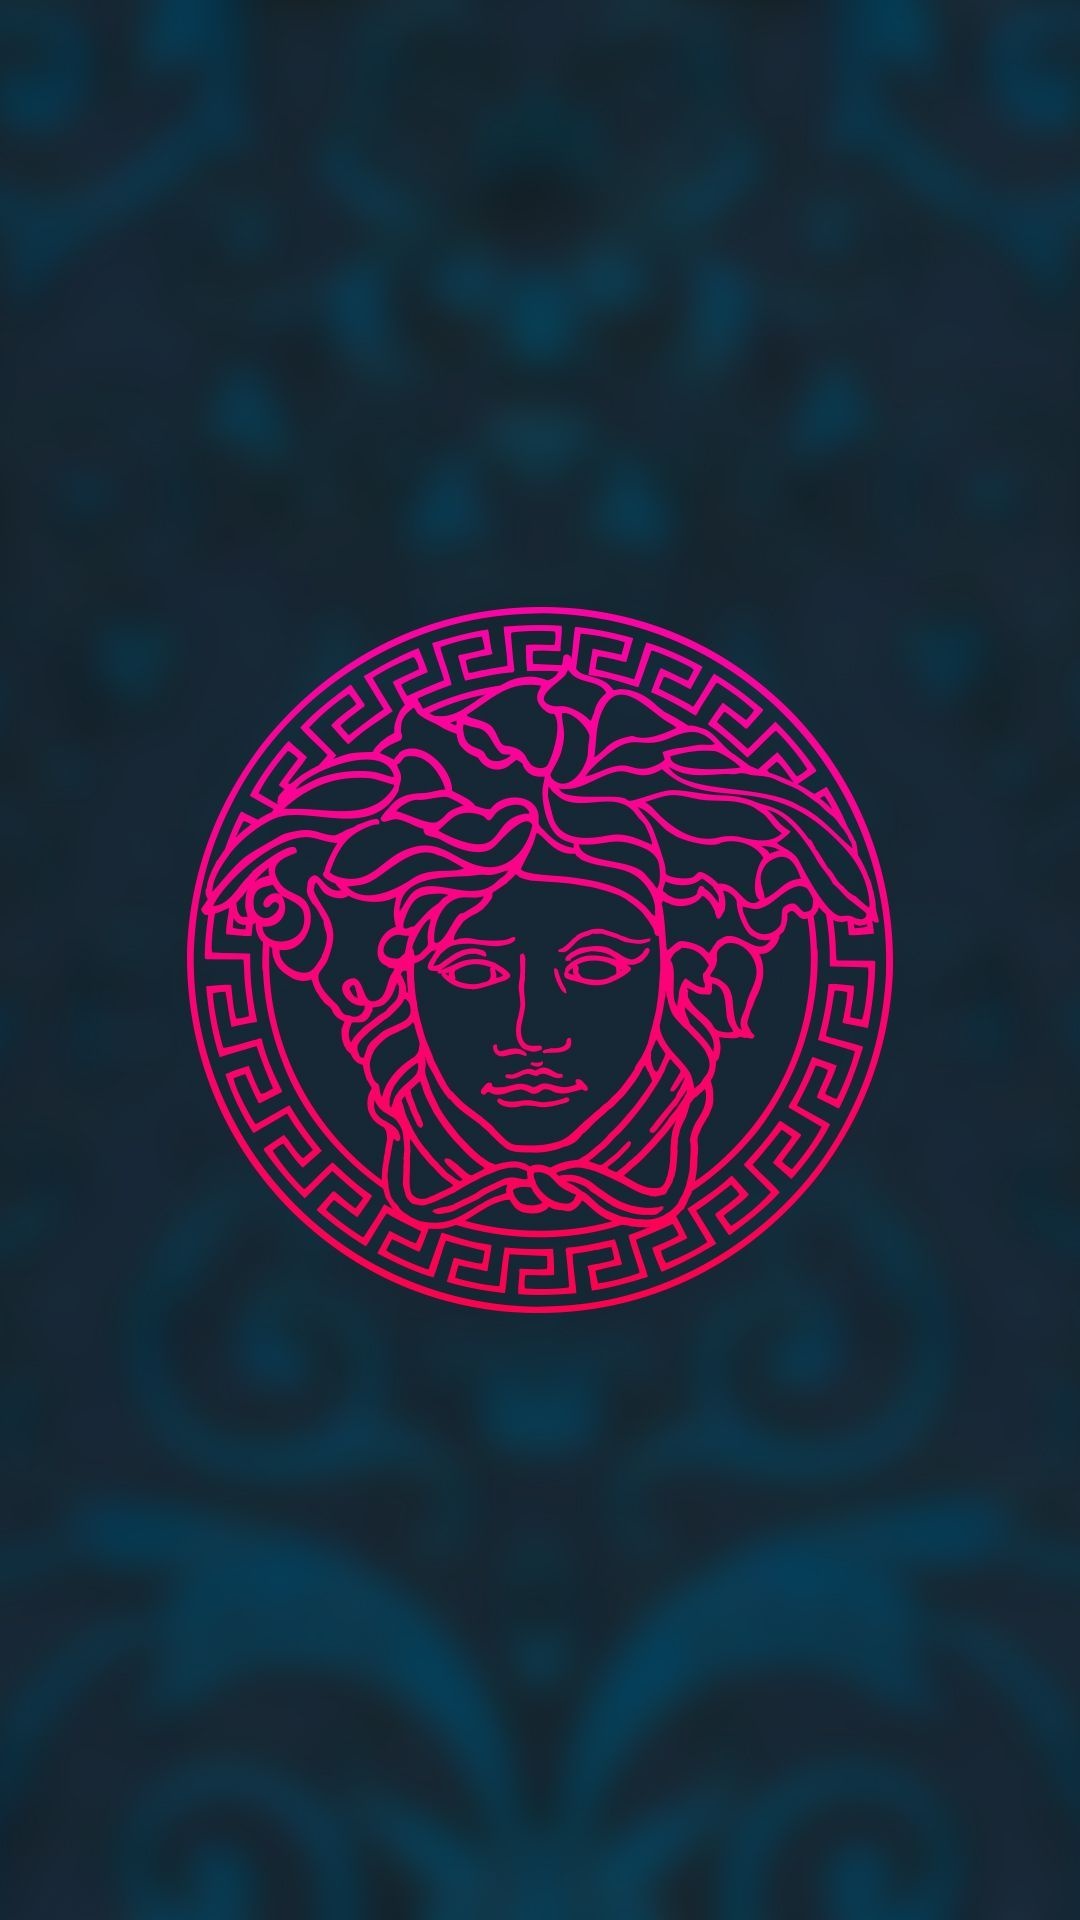 Versace: Medusa, One of the most known logos from the fashion world. 1080x1920 Full HD Wallpaper.